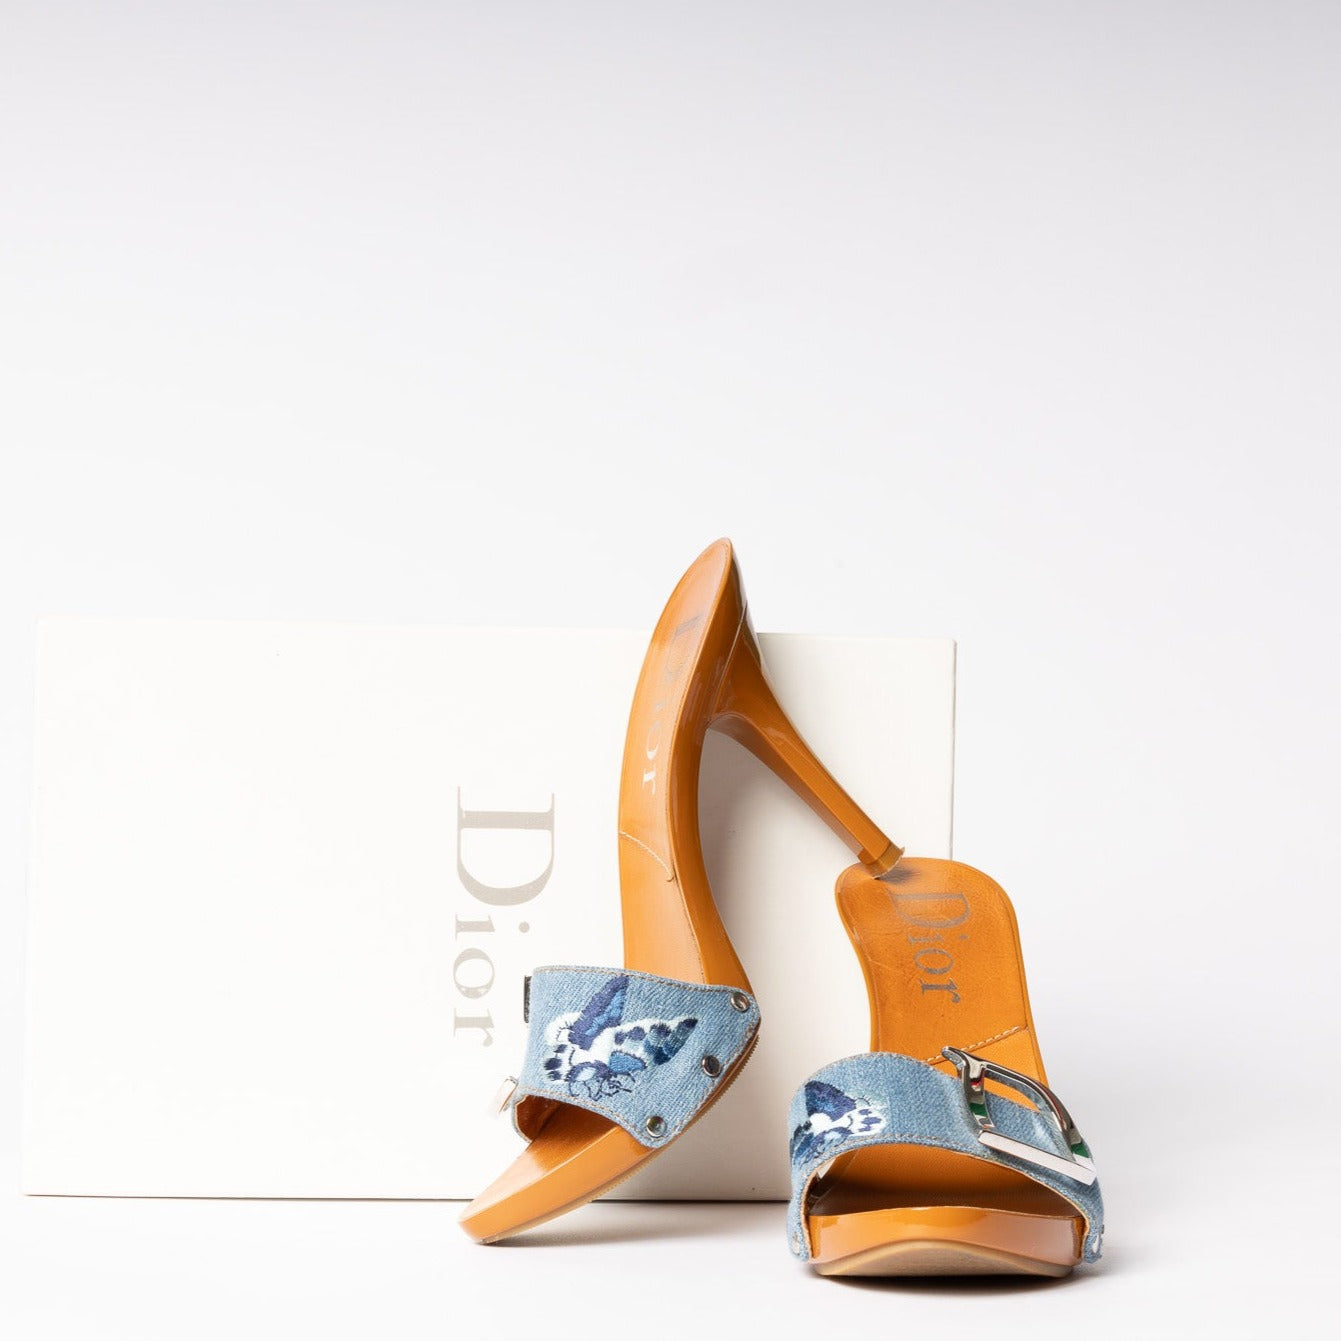 Vintage Dior Denim Heels - Timeless allure and retro elegance in iconic footwear for a fashionable statement.